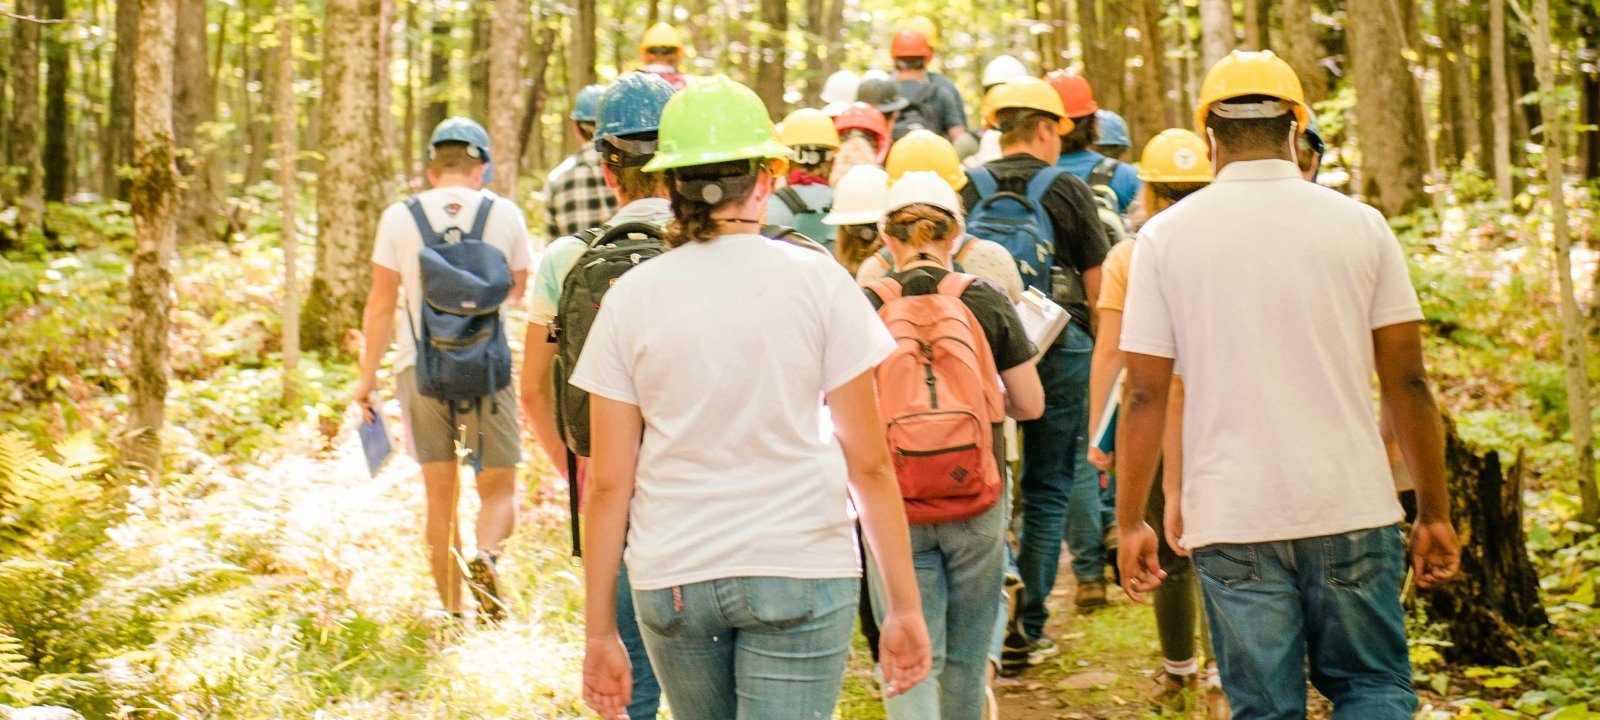 Students walking in a group in the forest wearing hardhats